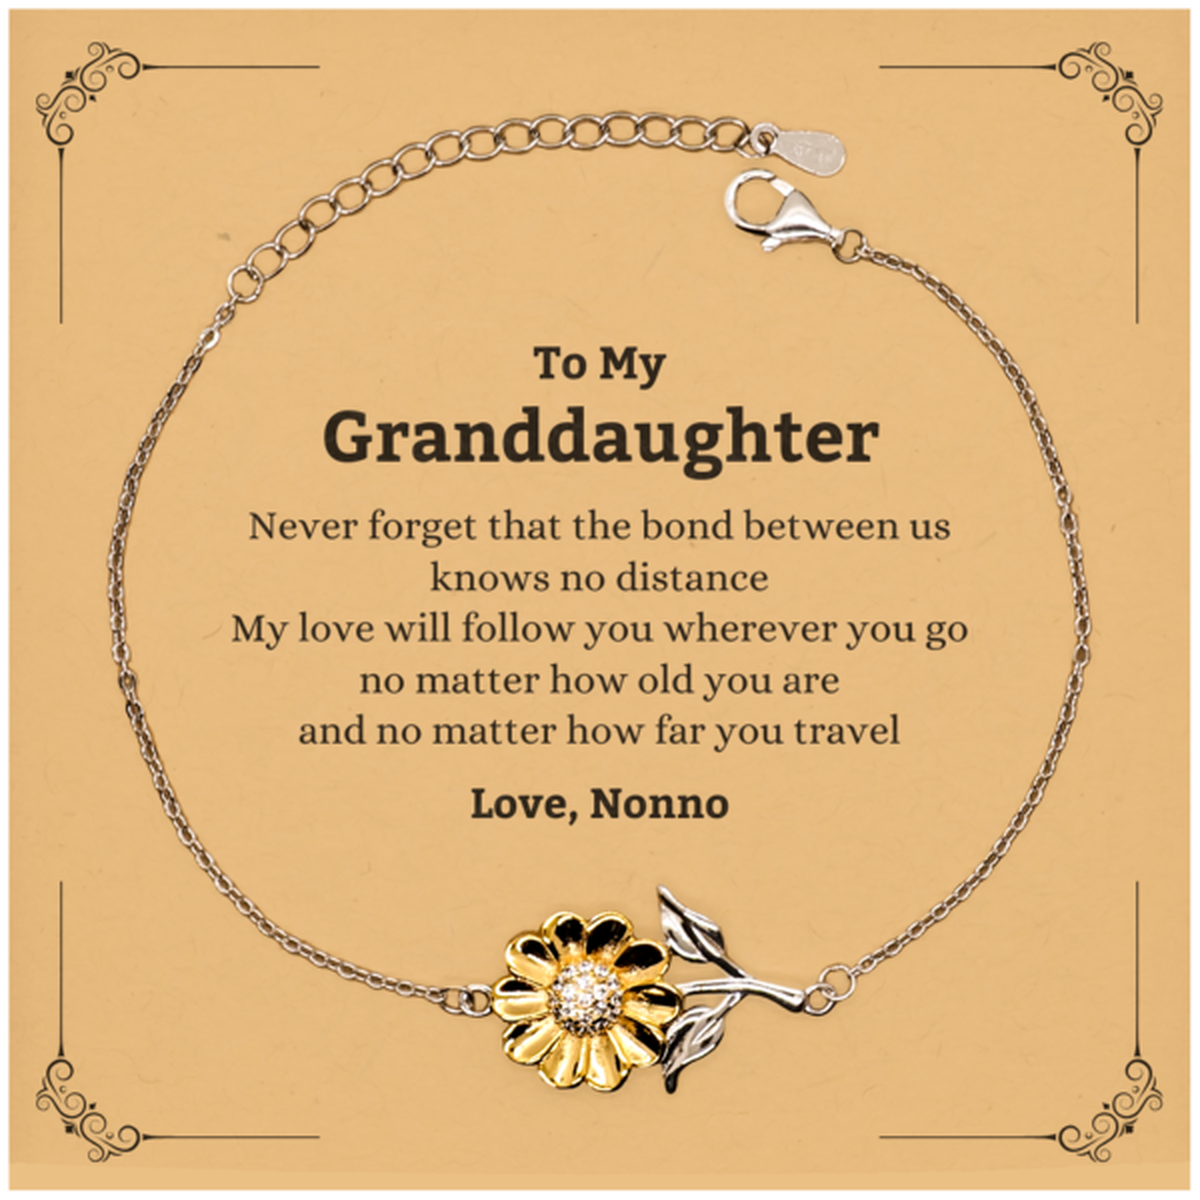 Granddaughter Birthday Gifts from Nonno, Adjustable Sunflower Bracelet for Granddaughter Christmas Graduation Unique Gifts Granddaughter Never forget that the bond between us knows no distance. Love, Nonno